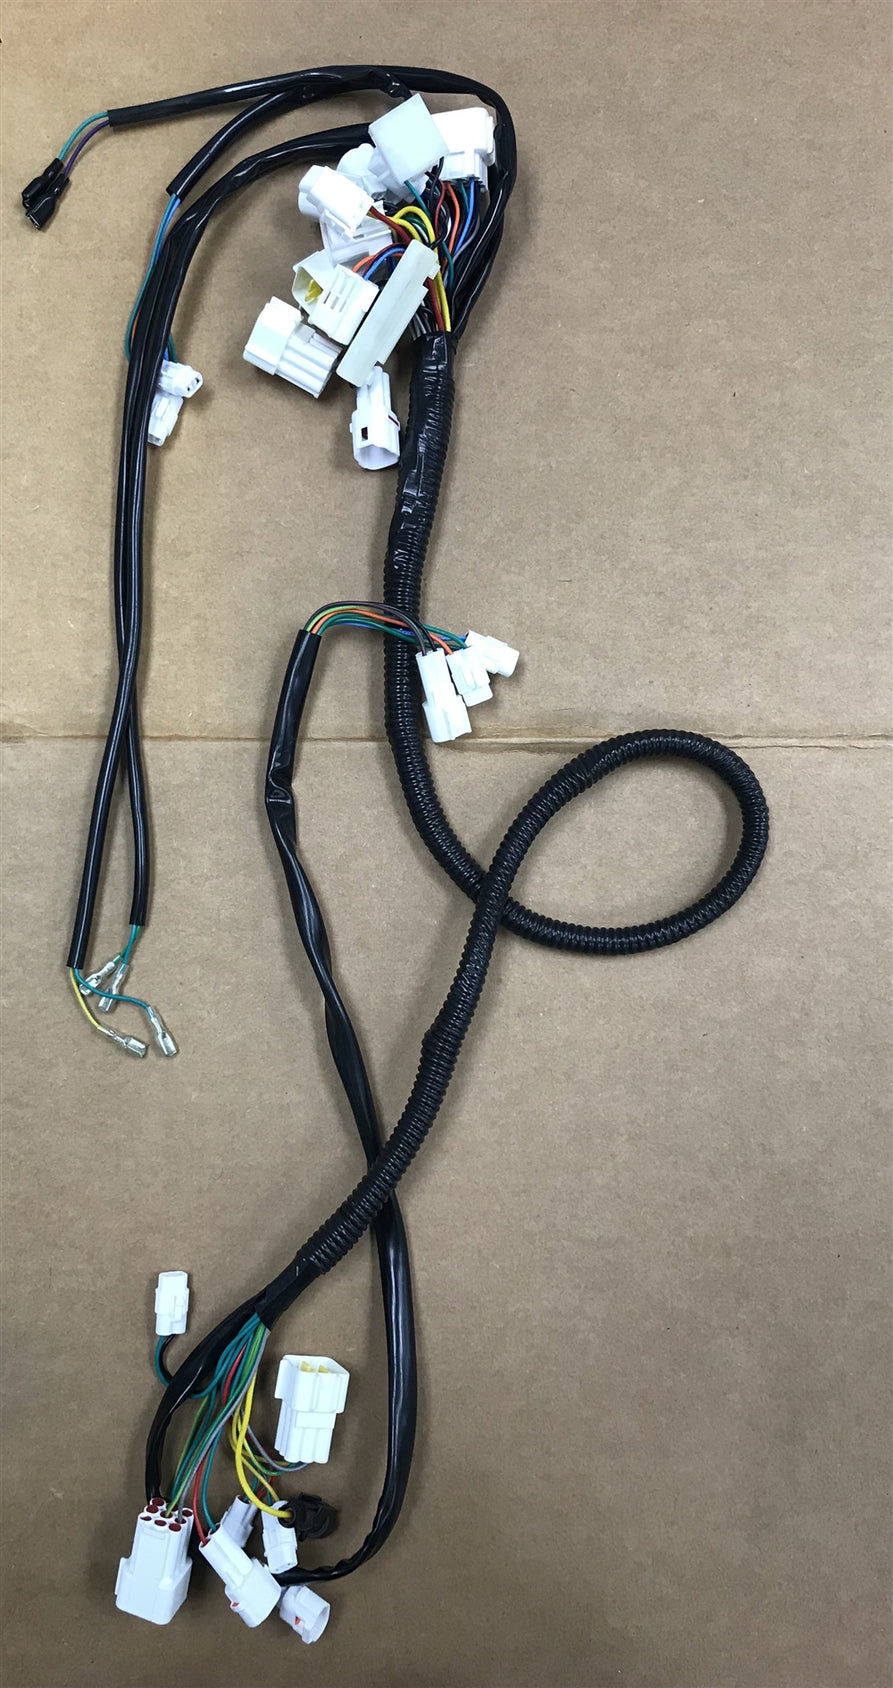 Wiring harness for beast AWD ATV deluxe